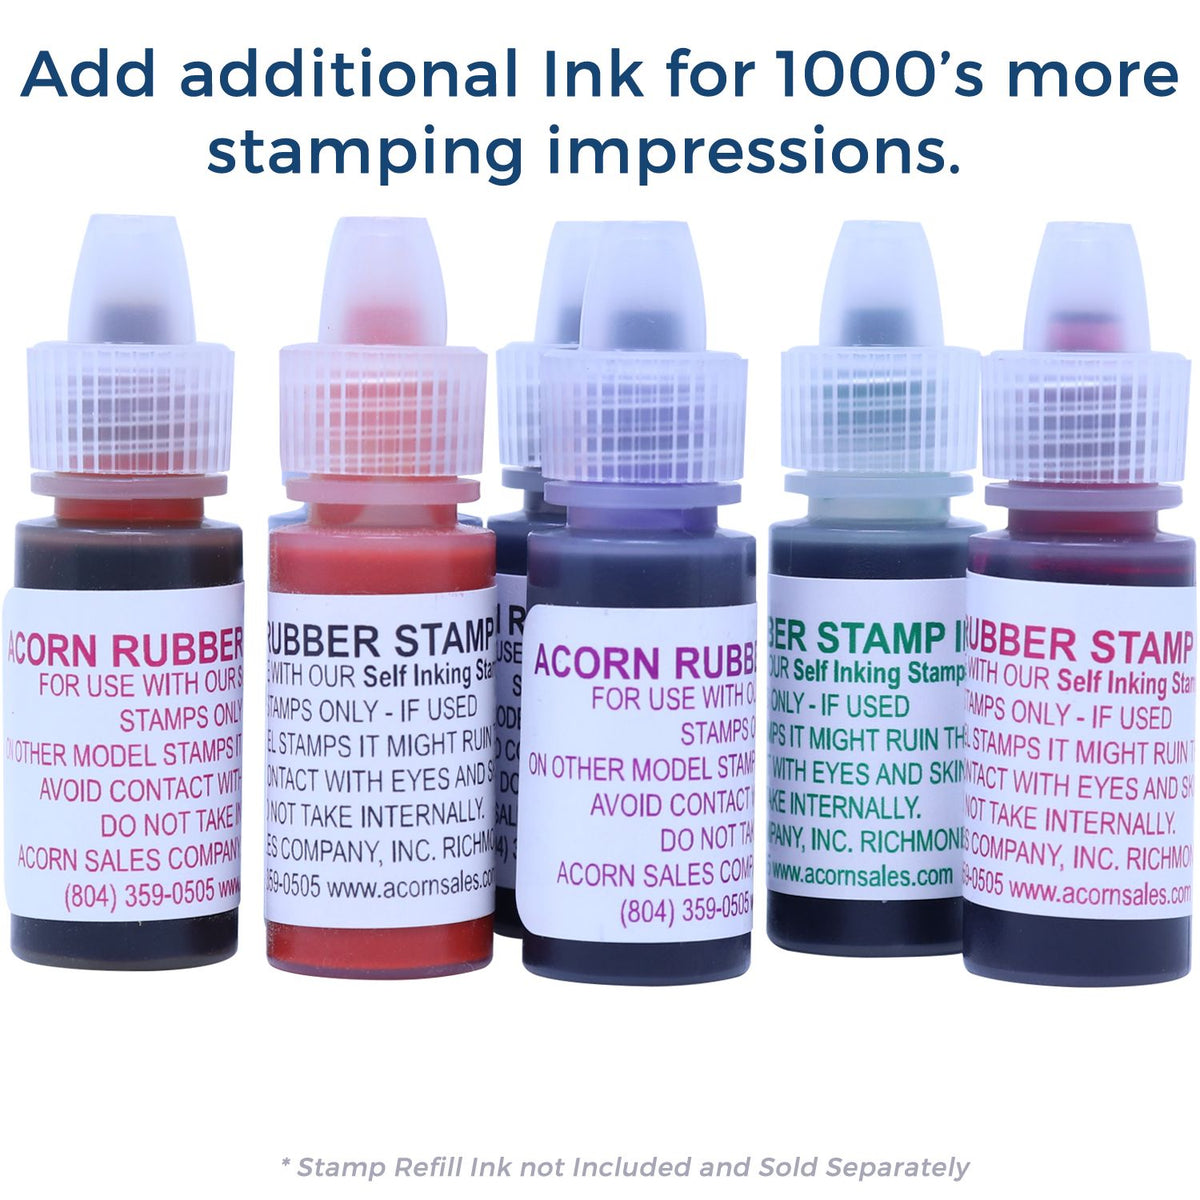 Refill Ink for Self-Inking Round Bravo Stamp Available